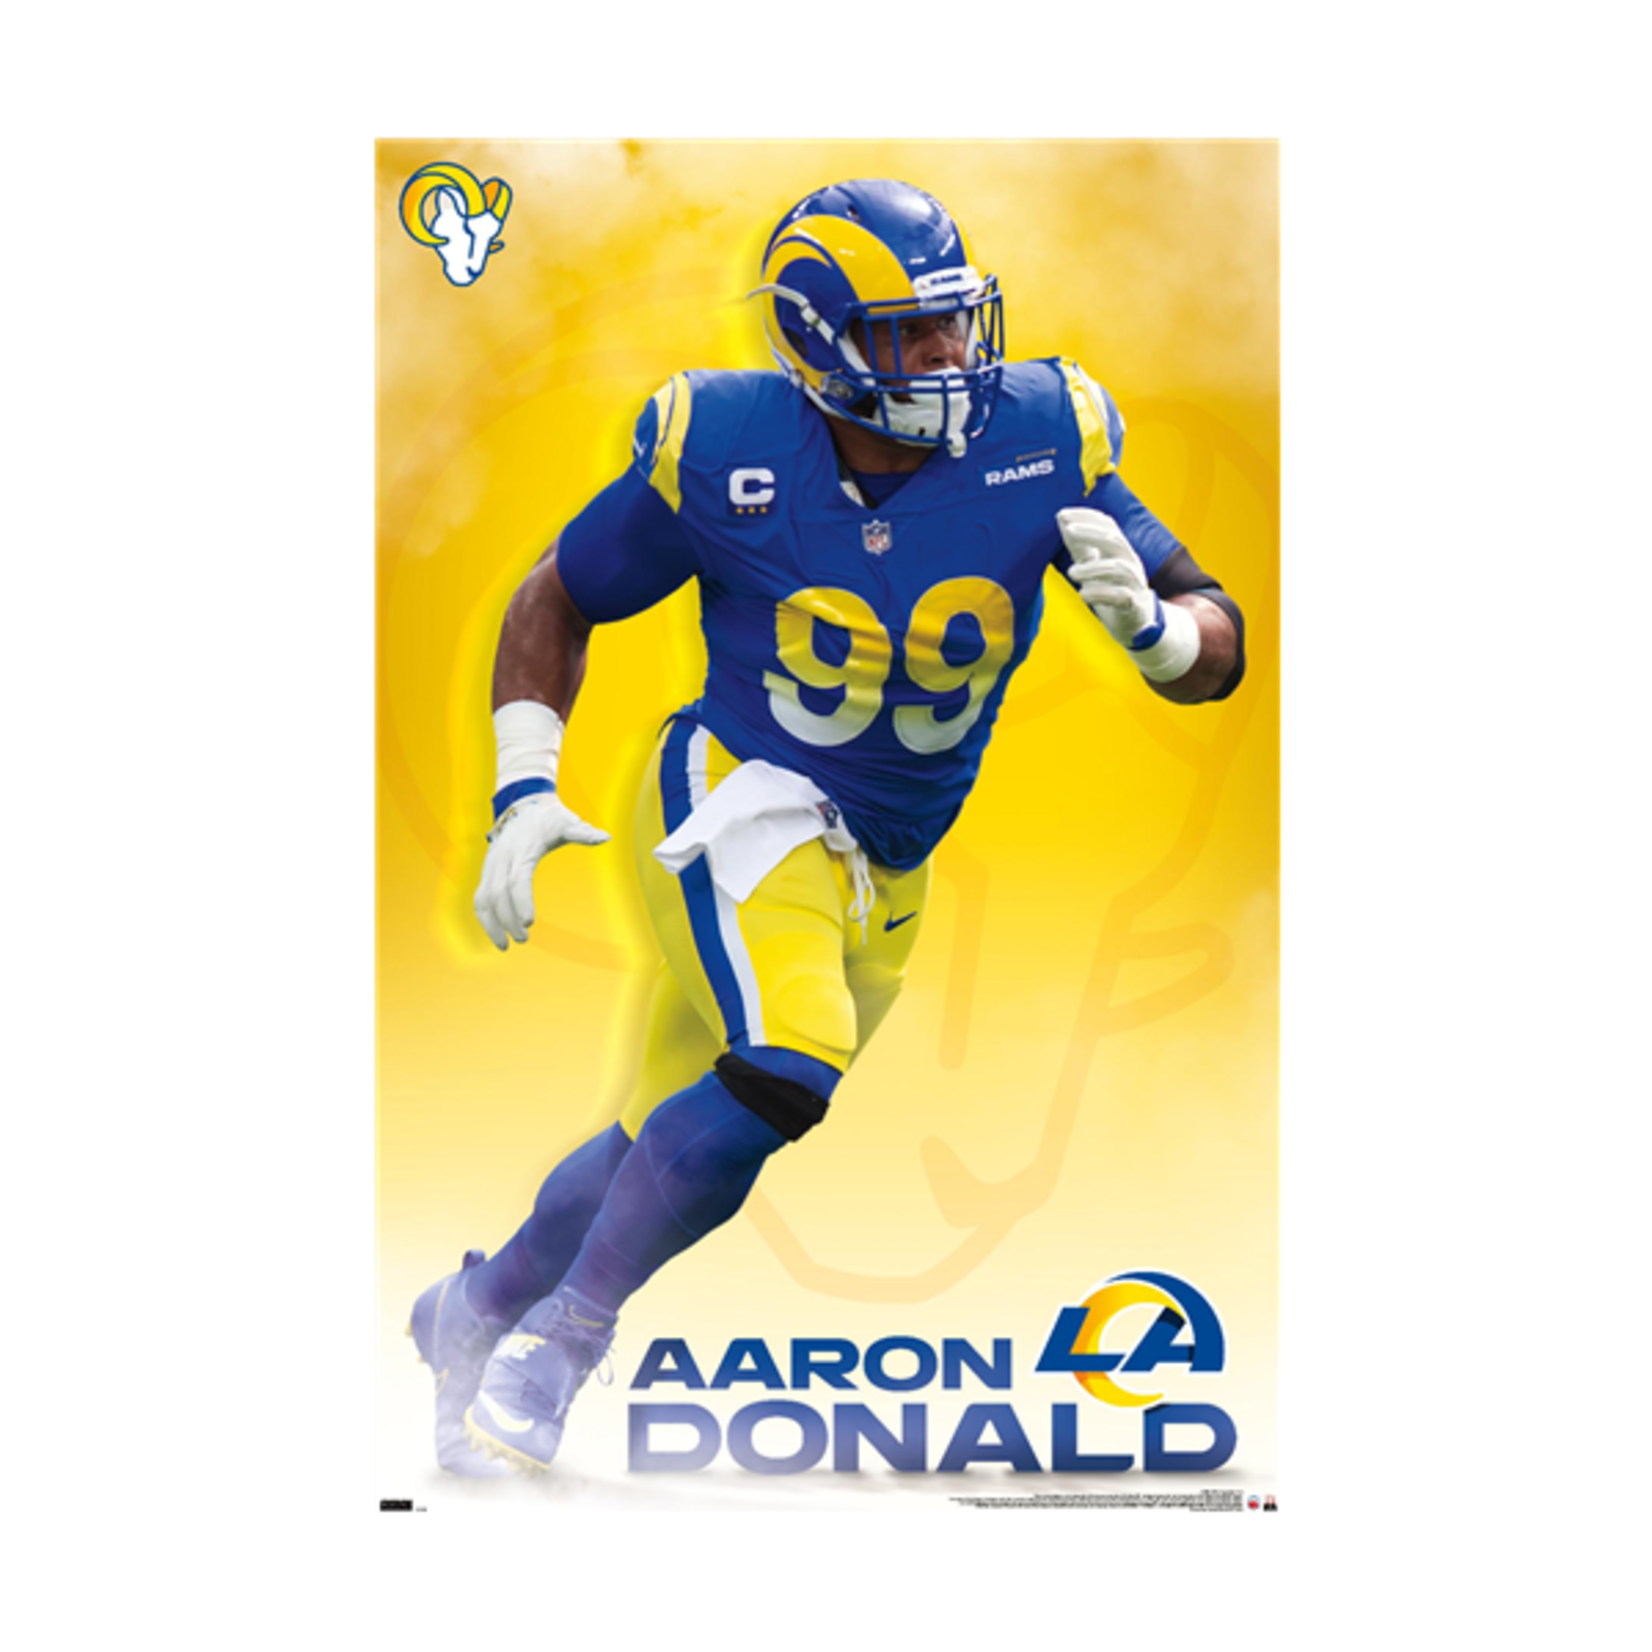 NFL LOS ANGELES RAMS - AARON DONALD 21 ROLLED POSTER